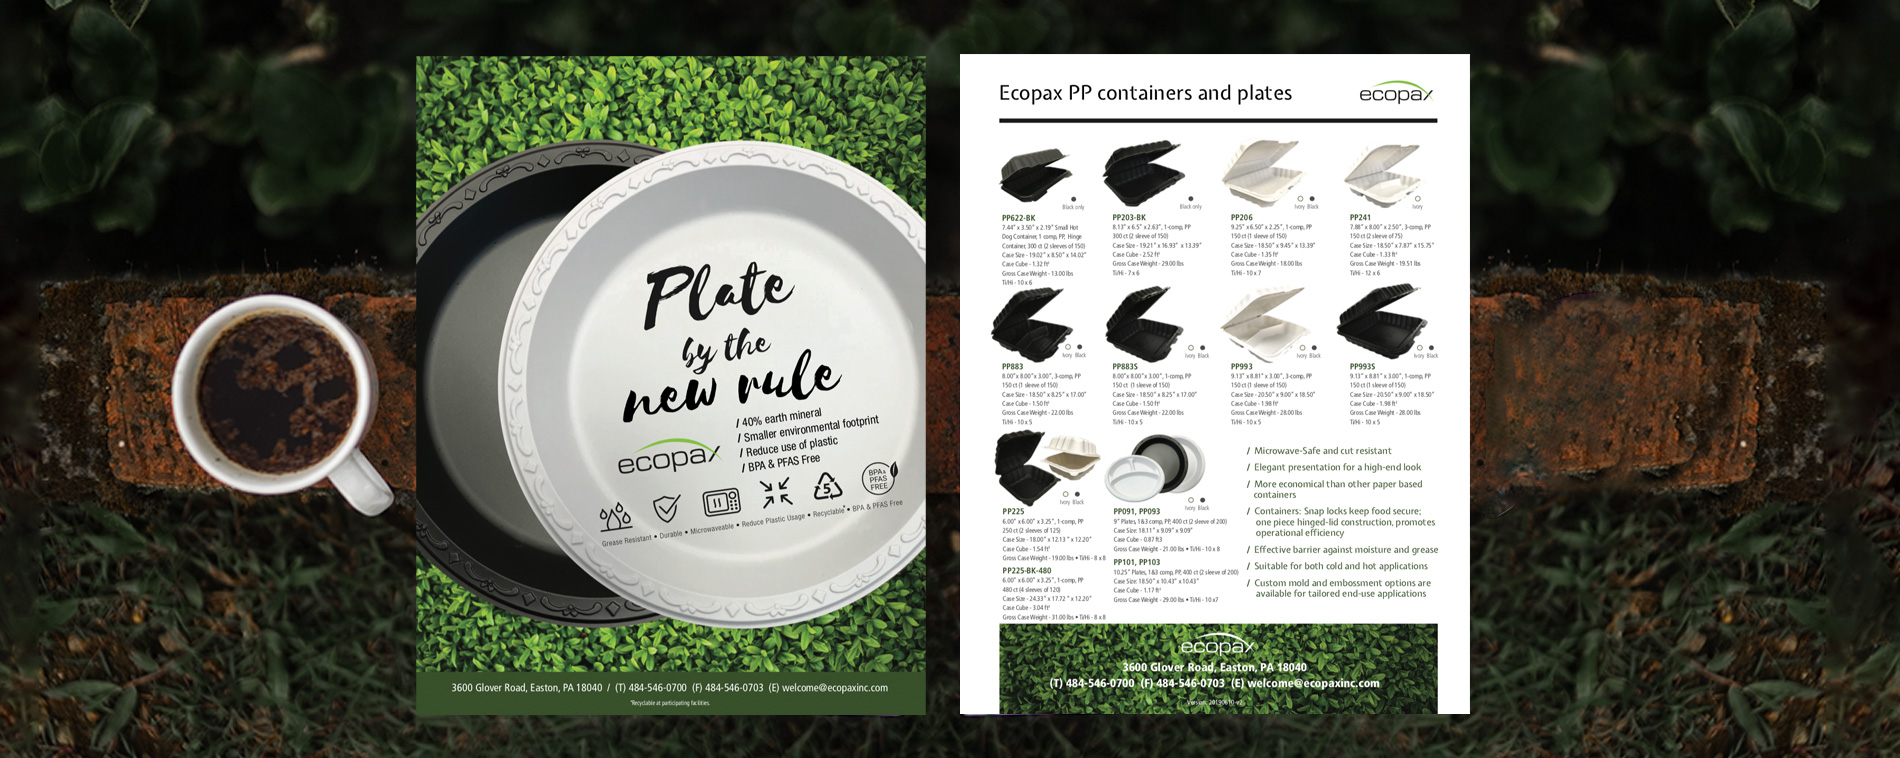 Plate by the new rule Ecopax Pebble Plates Flyers displayed on dark green background with coffee mug